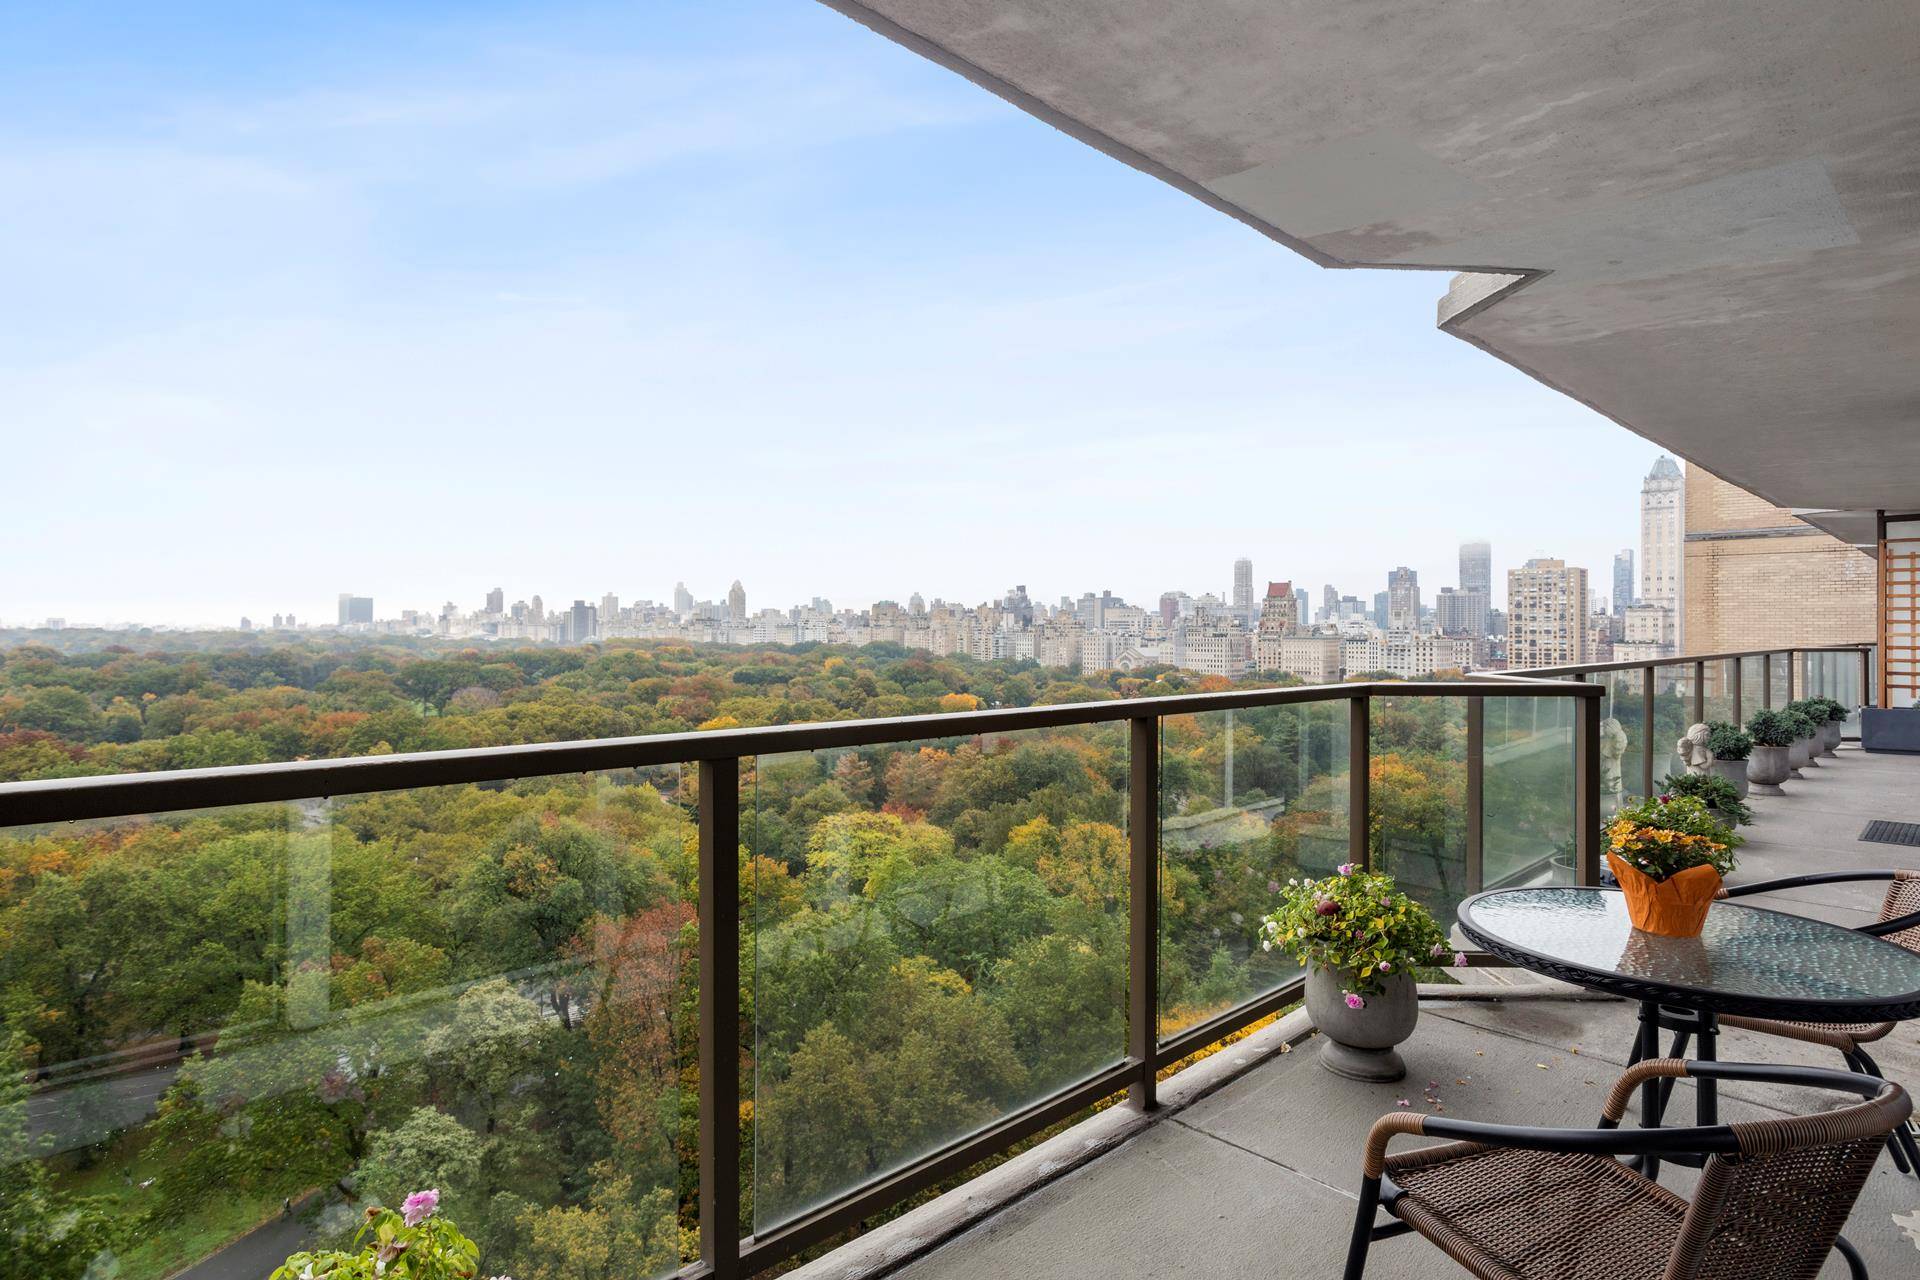 Upon entering this magnificent 18th floor home, you are struck by the breathtaking panoramic views from the floor to ceiling windows that run along the exterior of the apartment.